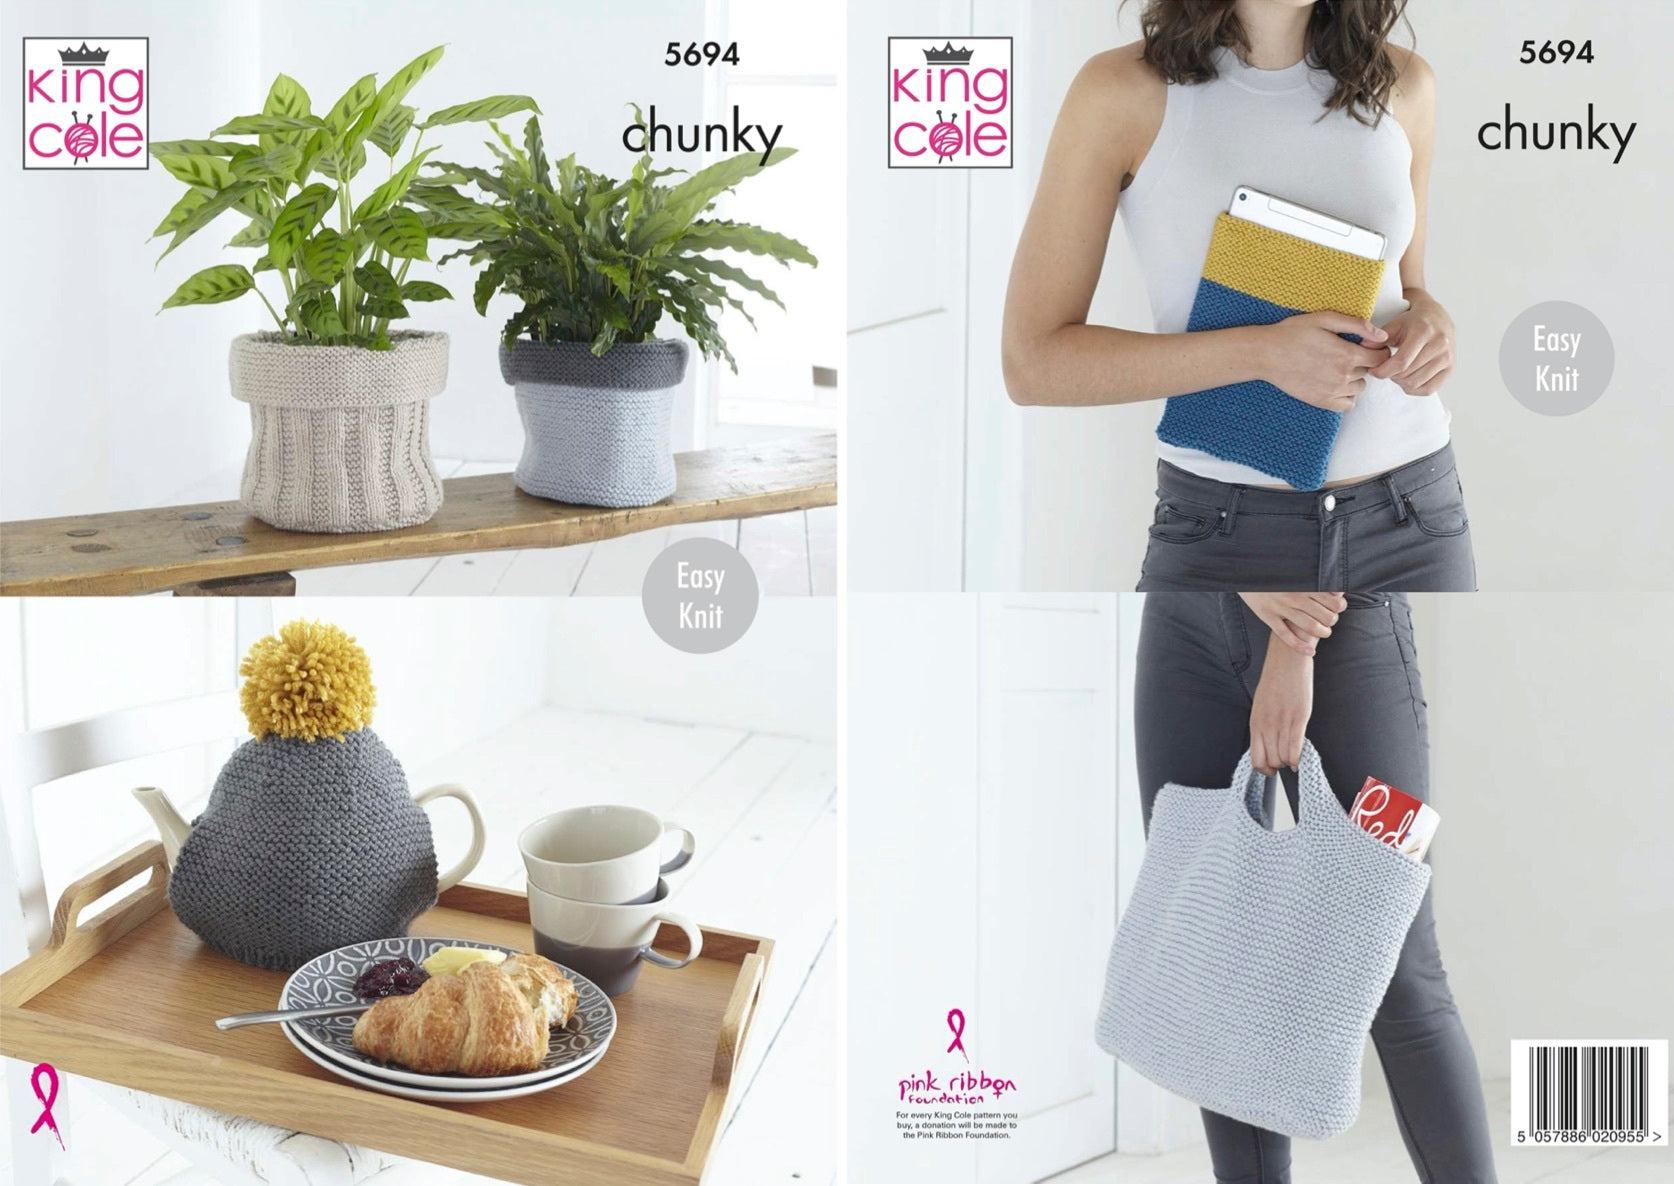 King Cole Pattern 5694 Plant Pot Sacks, Tablet Cover, Tea Cosy and Bag in Chunky